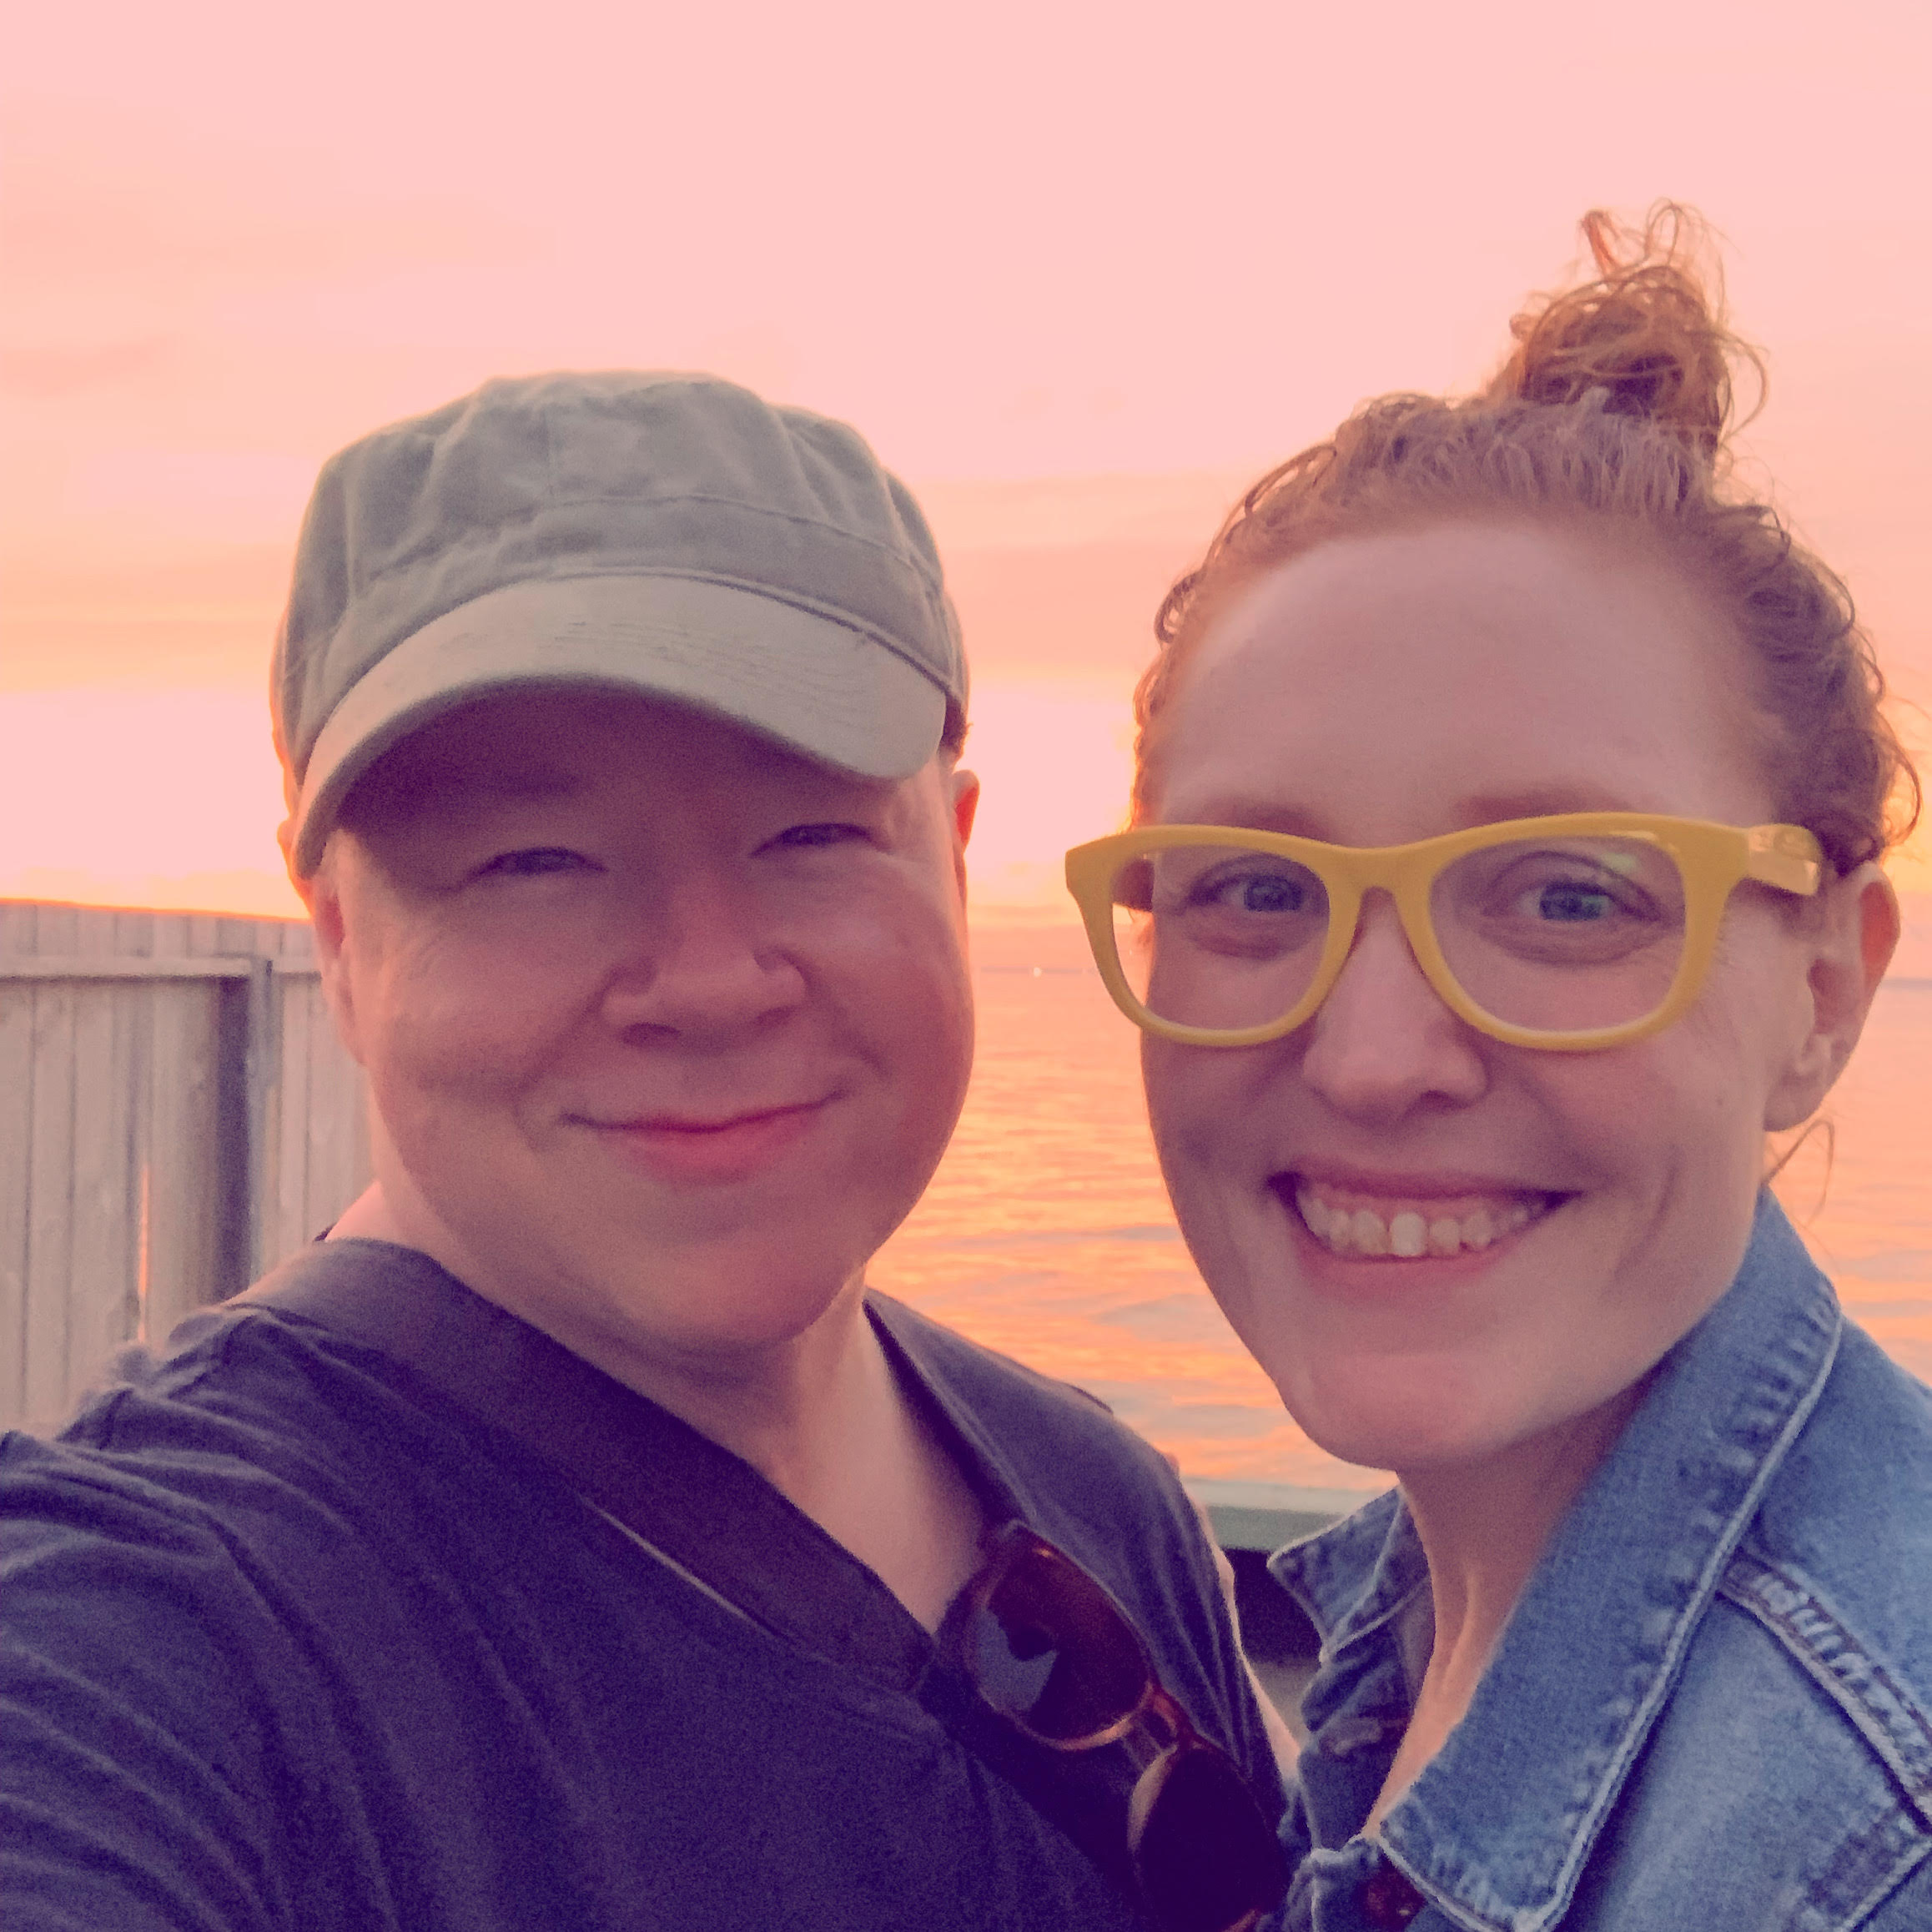 Erika and Katie pose on Fire Island. Erika is a white intersex person wearing a hat and smiling widely at the camera, Katie is a white person with red hair in a bun and wears yellow-rimmed glasses, also smiling widely. The two are very close to each other with arms around each other.